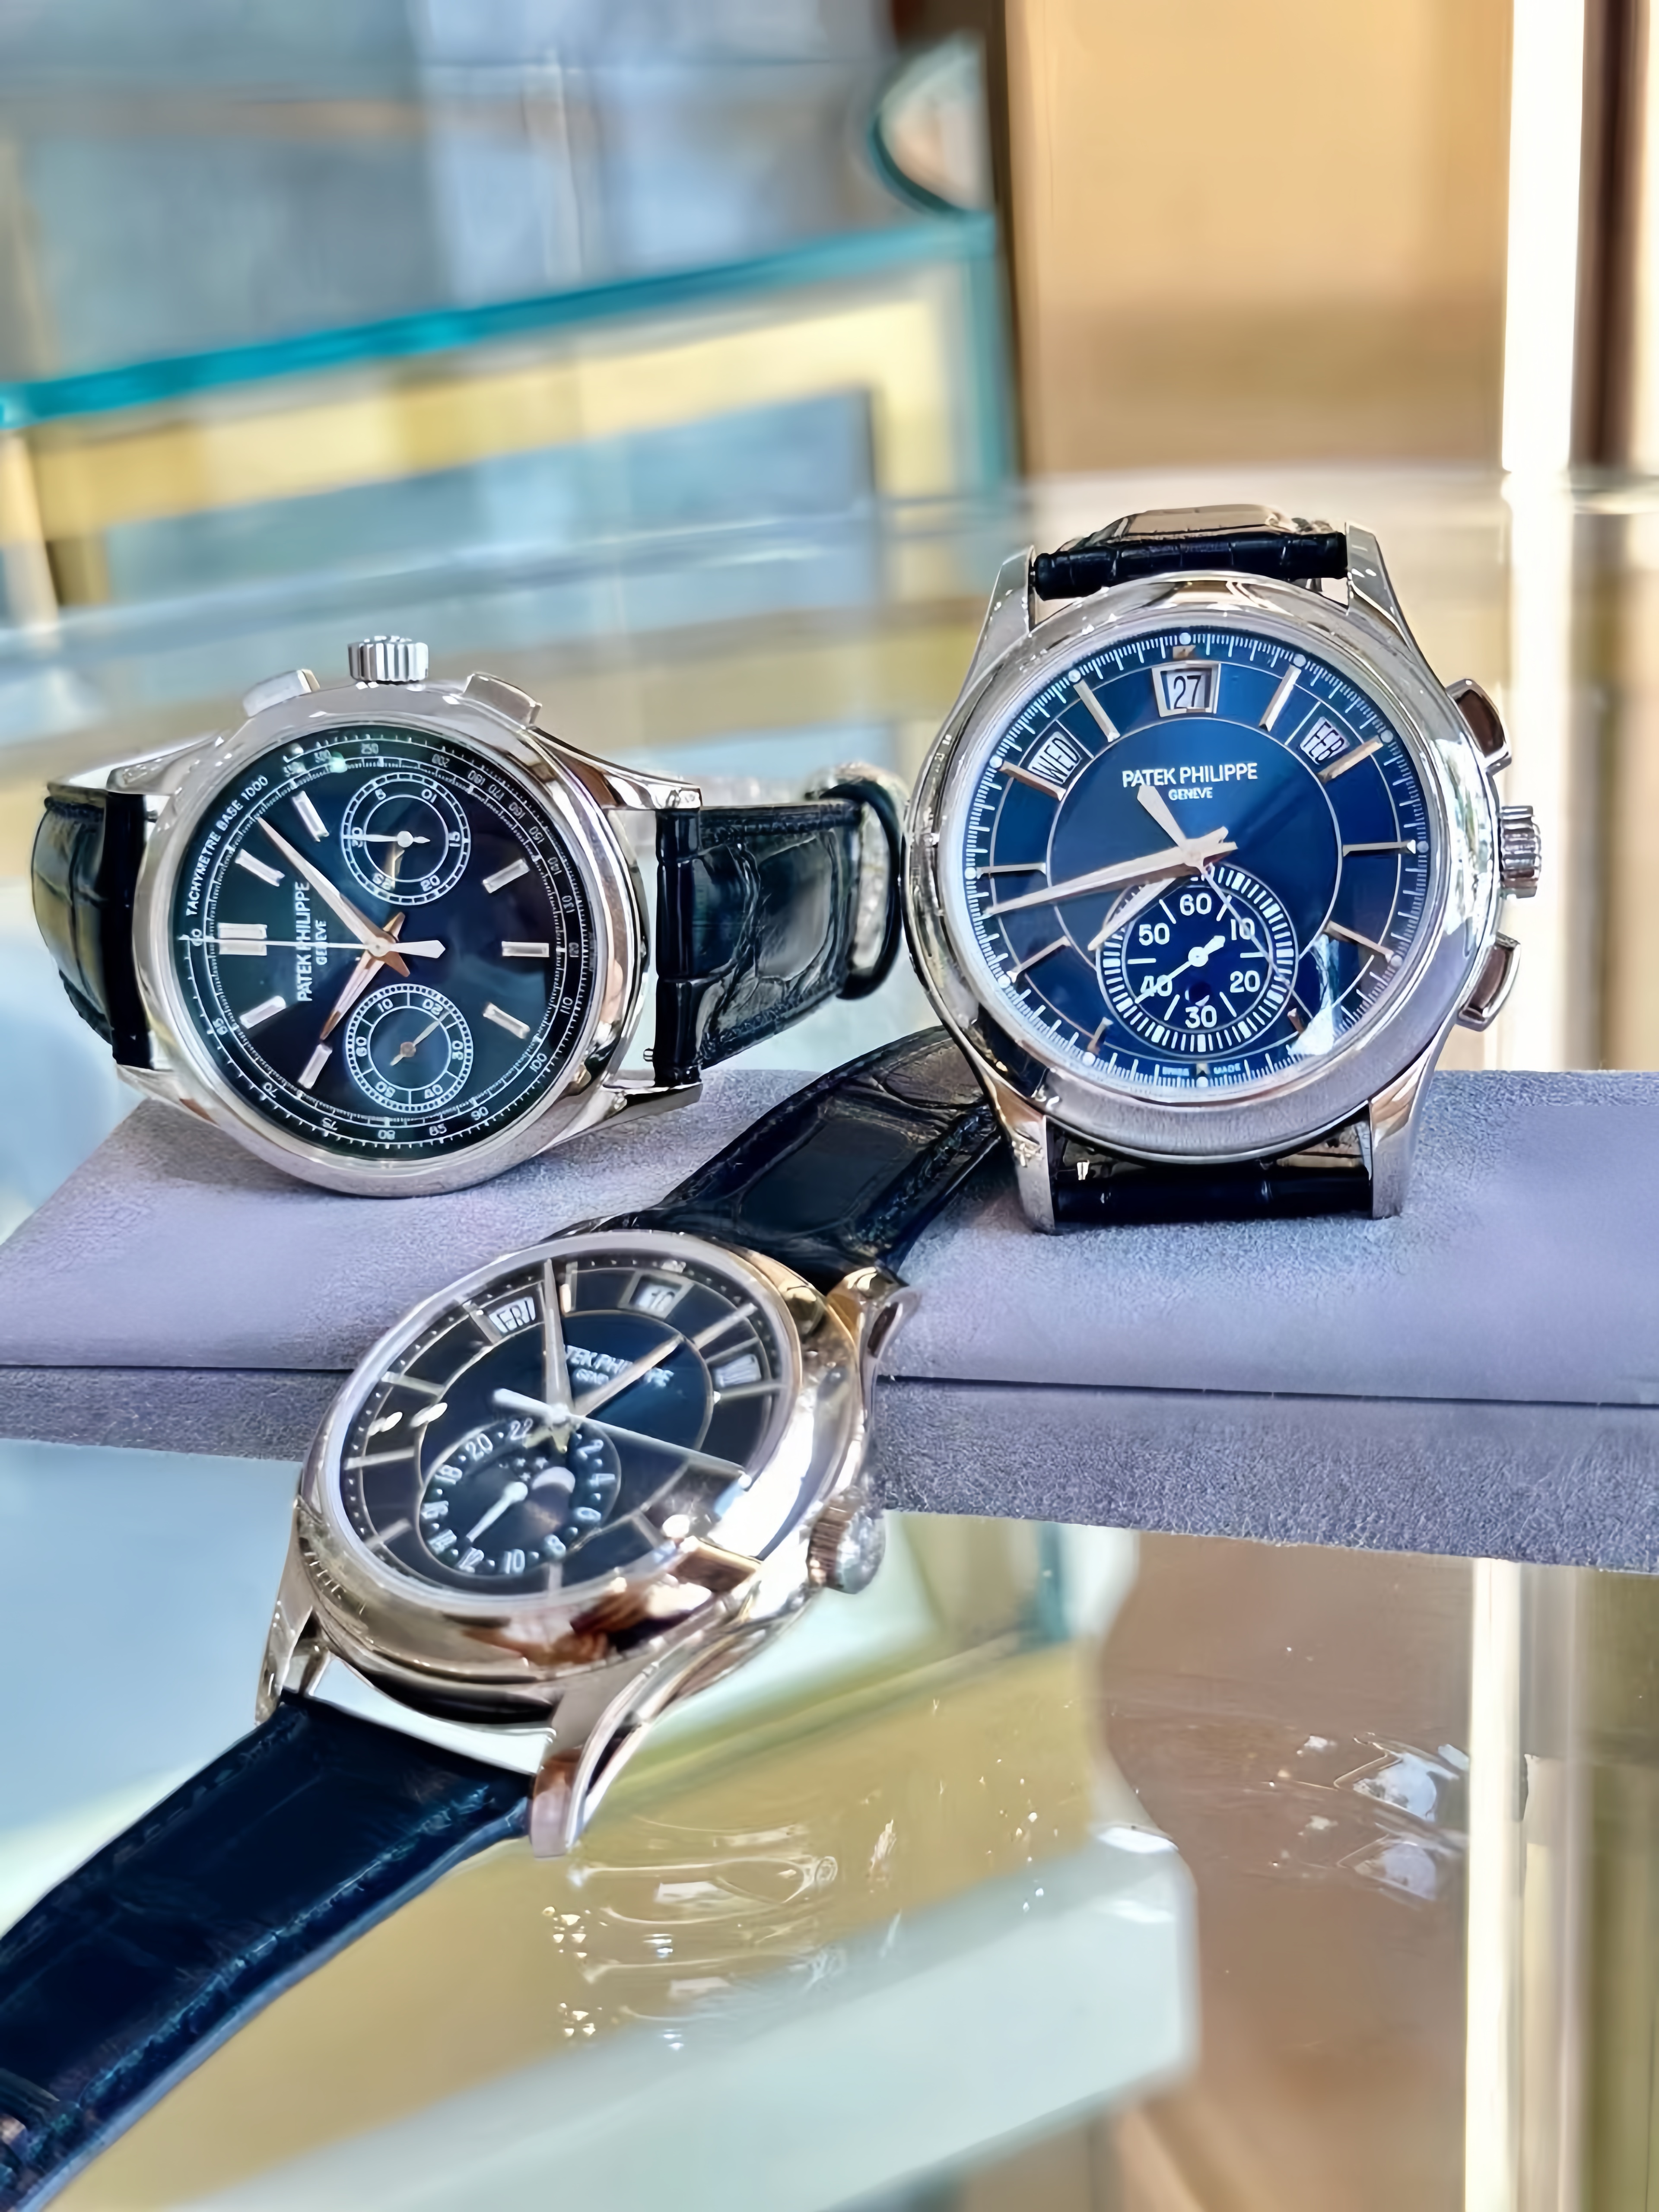 Patek Philippe Dress Blue Dial Watches In Stock– Do You Have A Favorite?